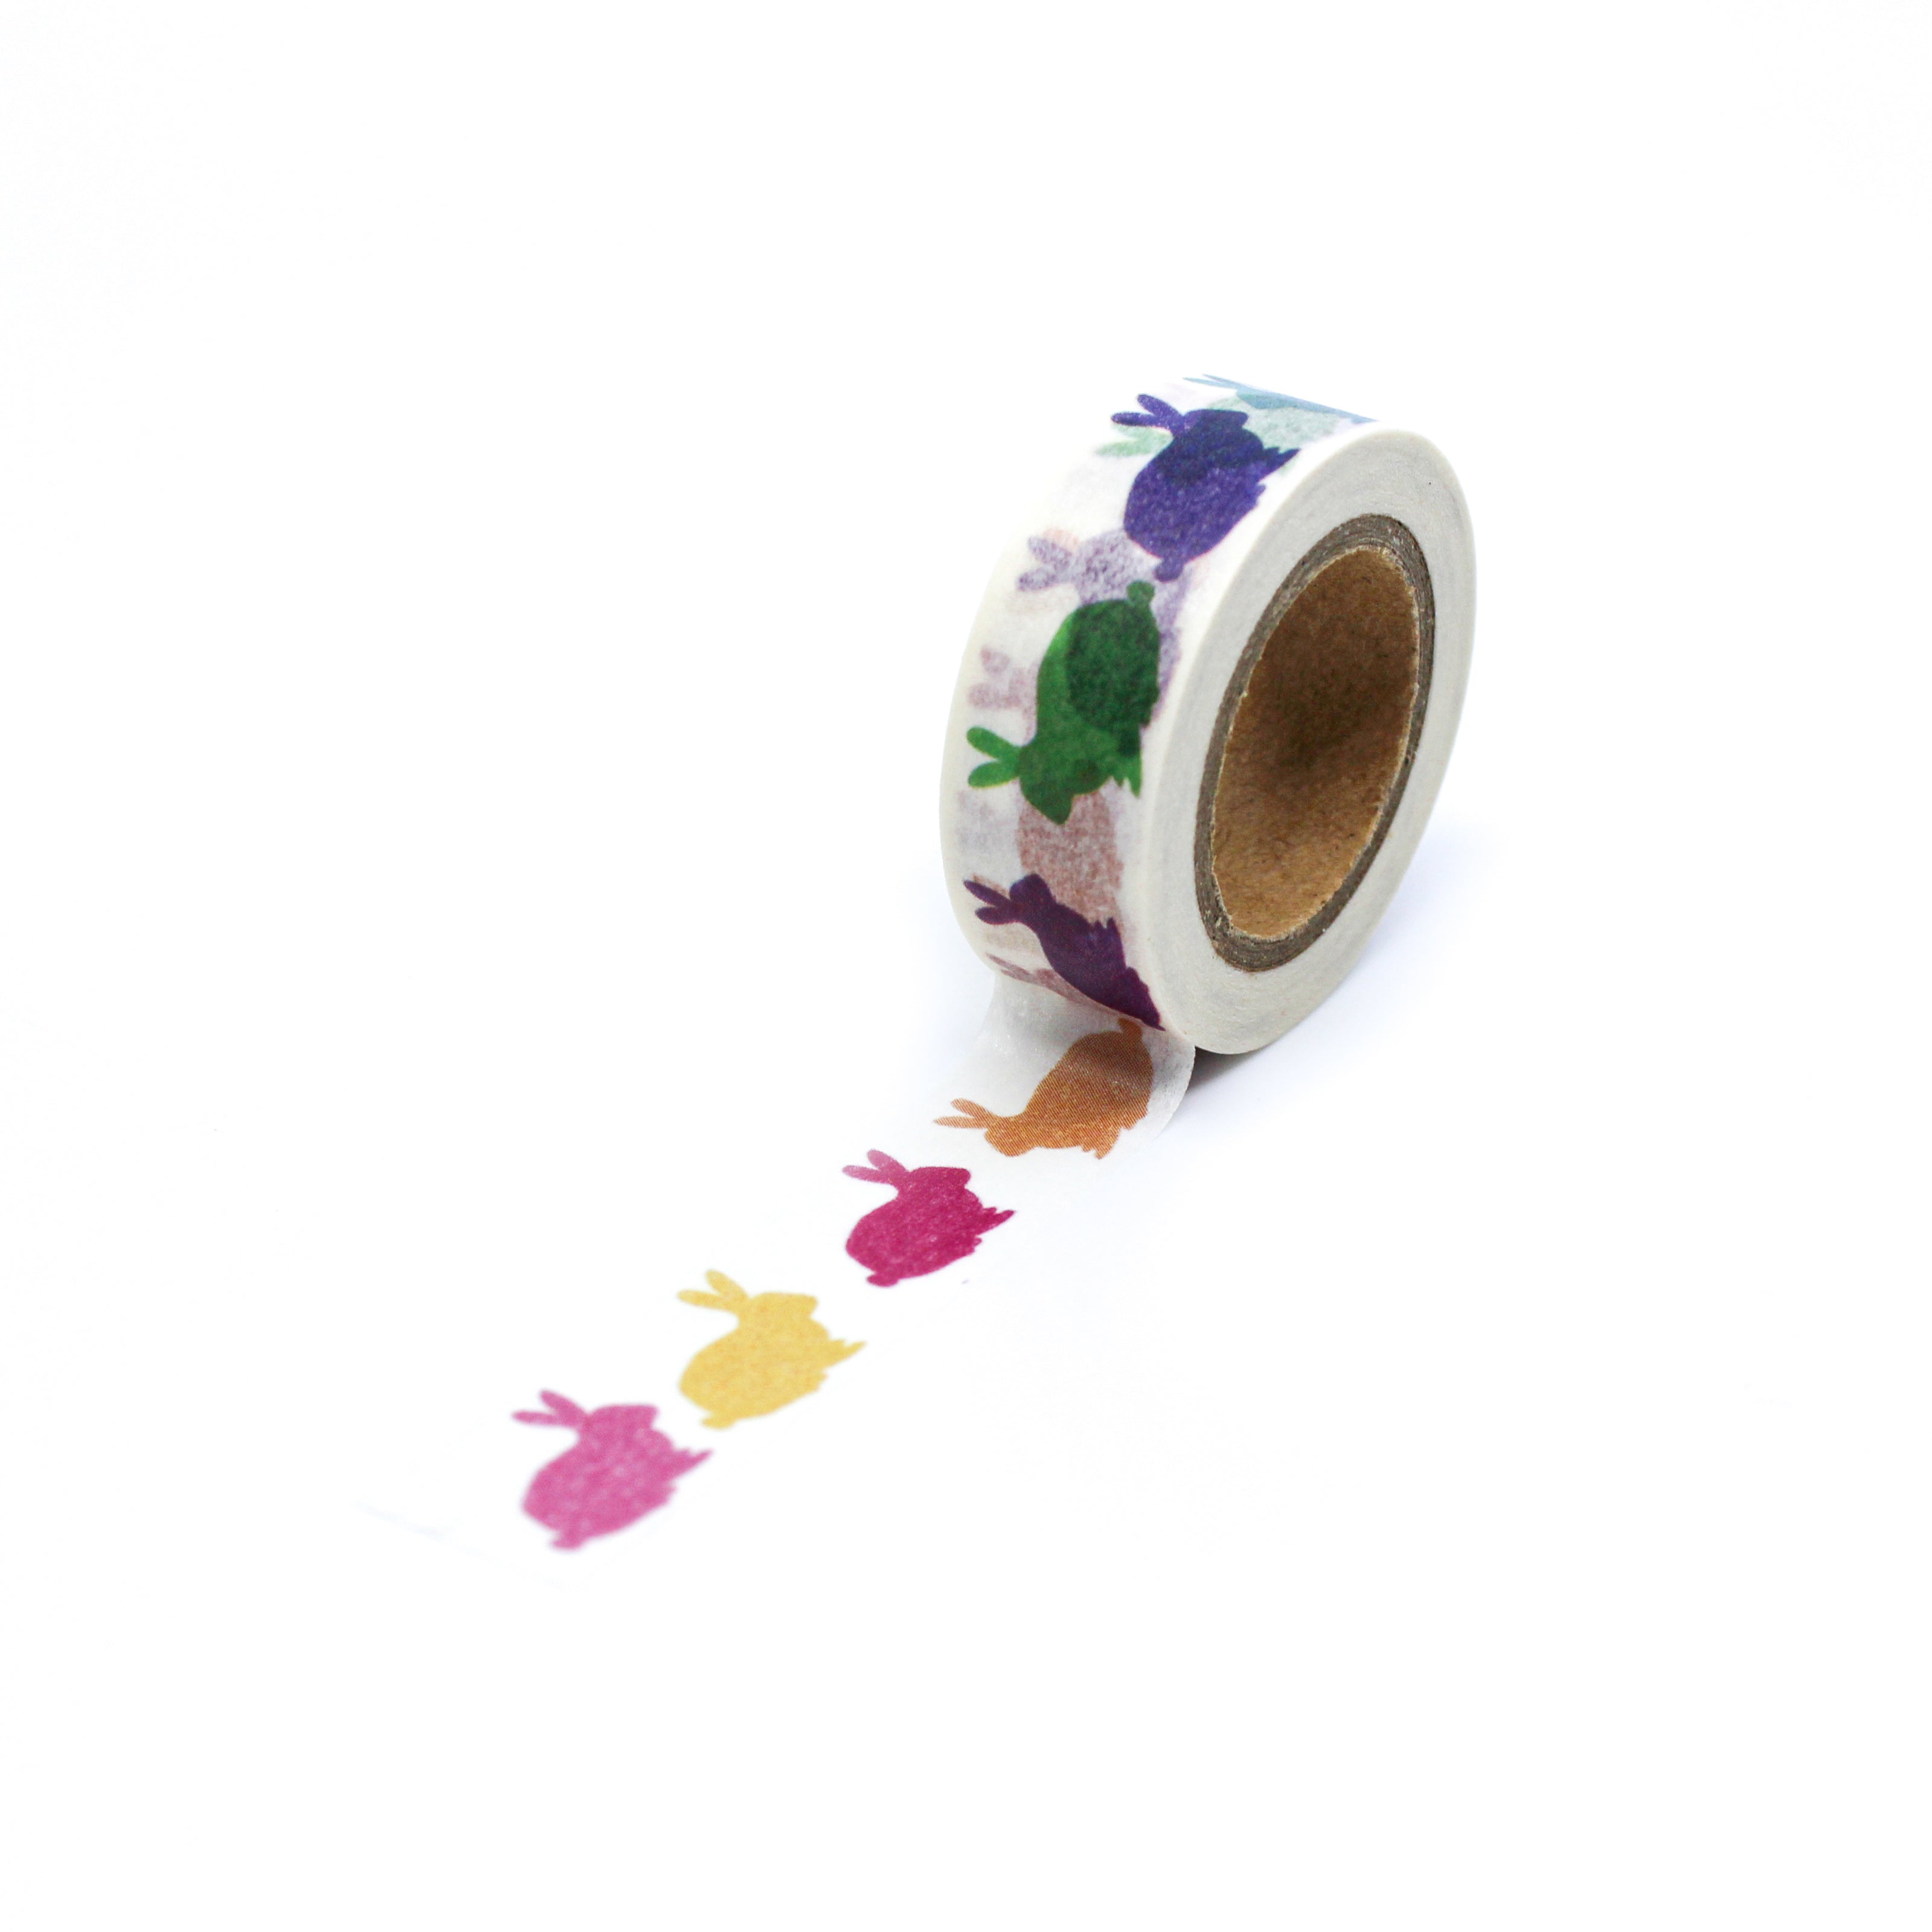 This is a full pattern repeat view of solid multi-color rabbits washi tape from BBB Supplies Craft Shop